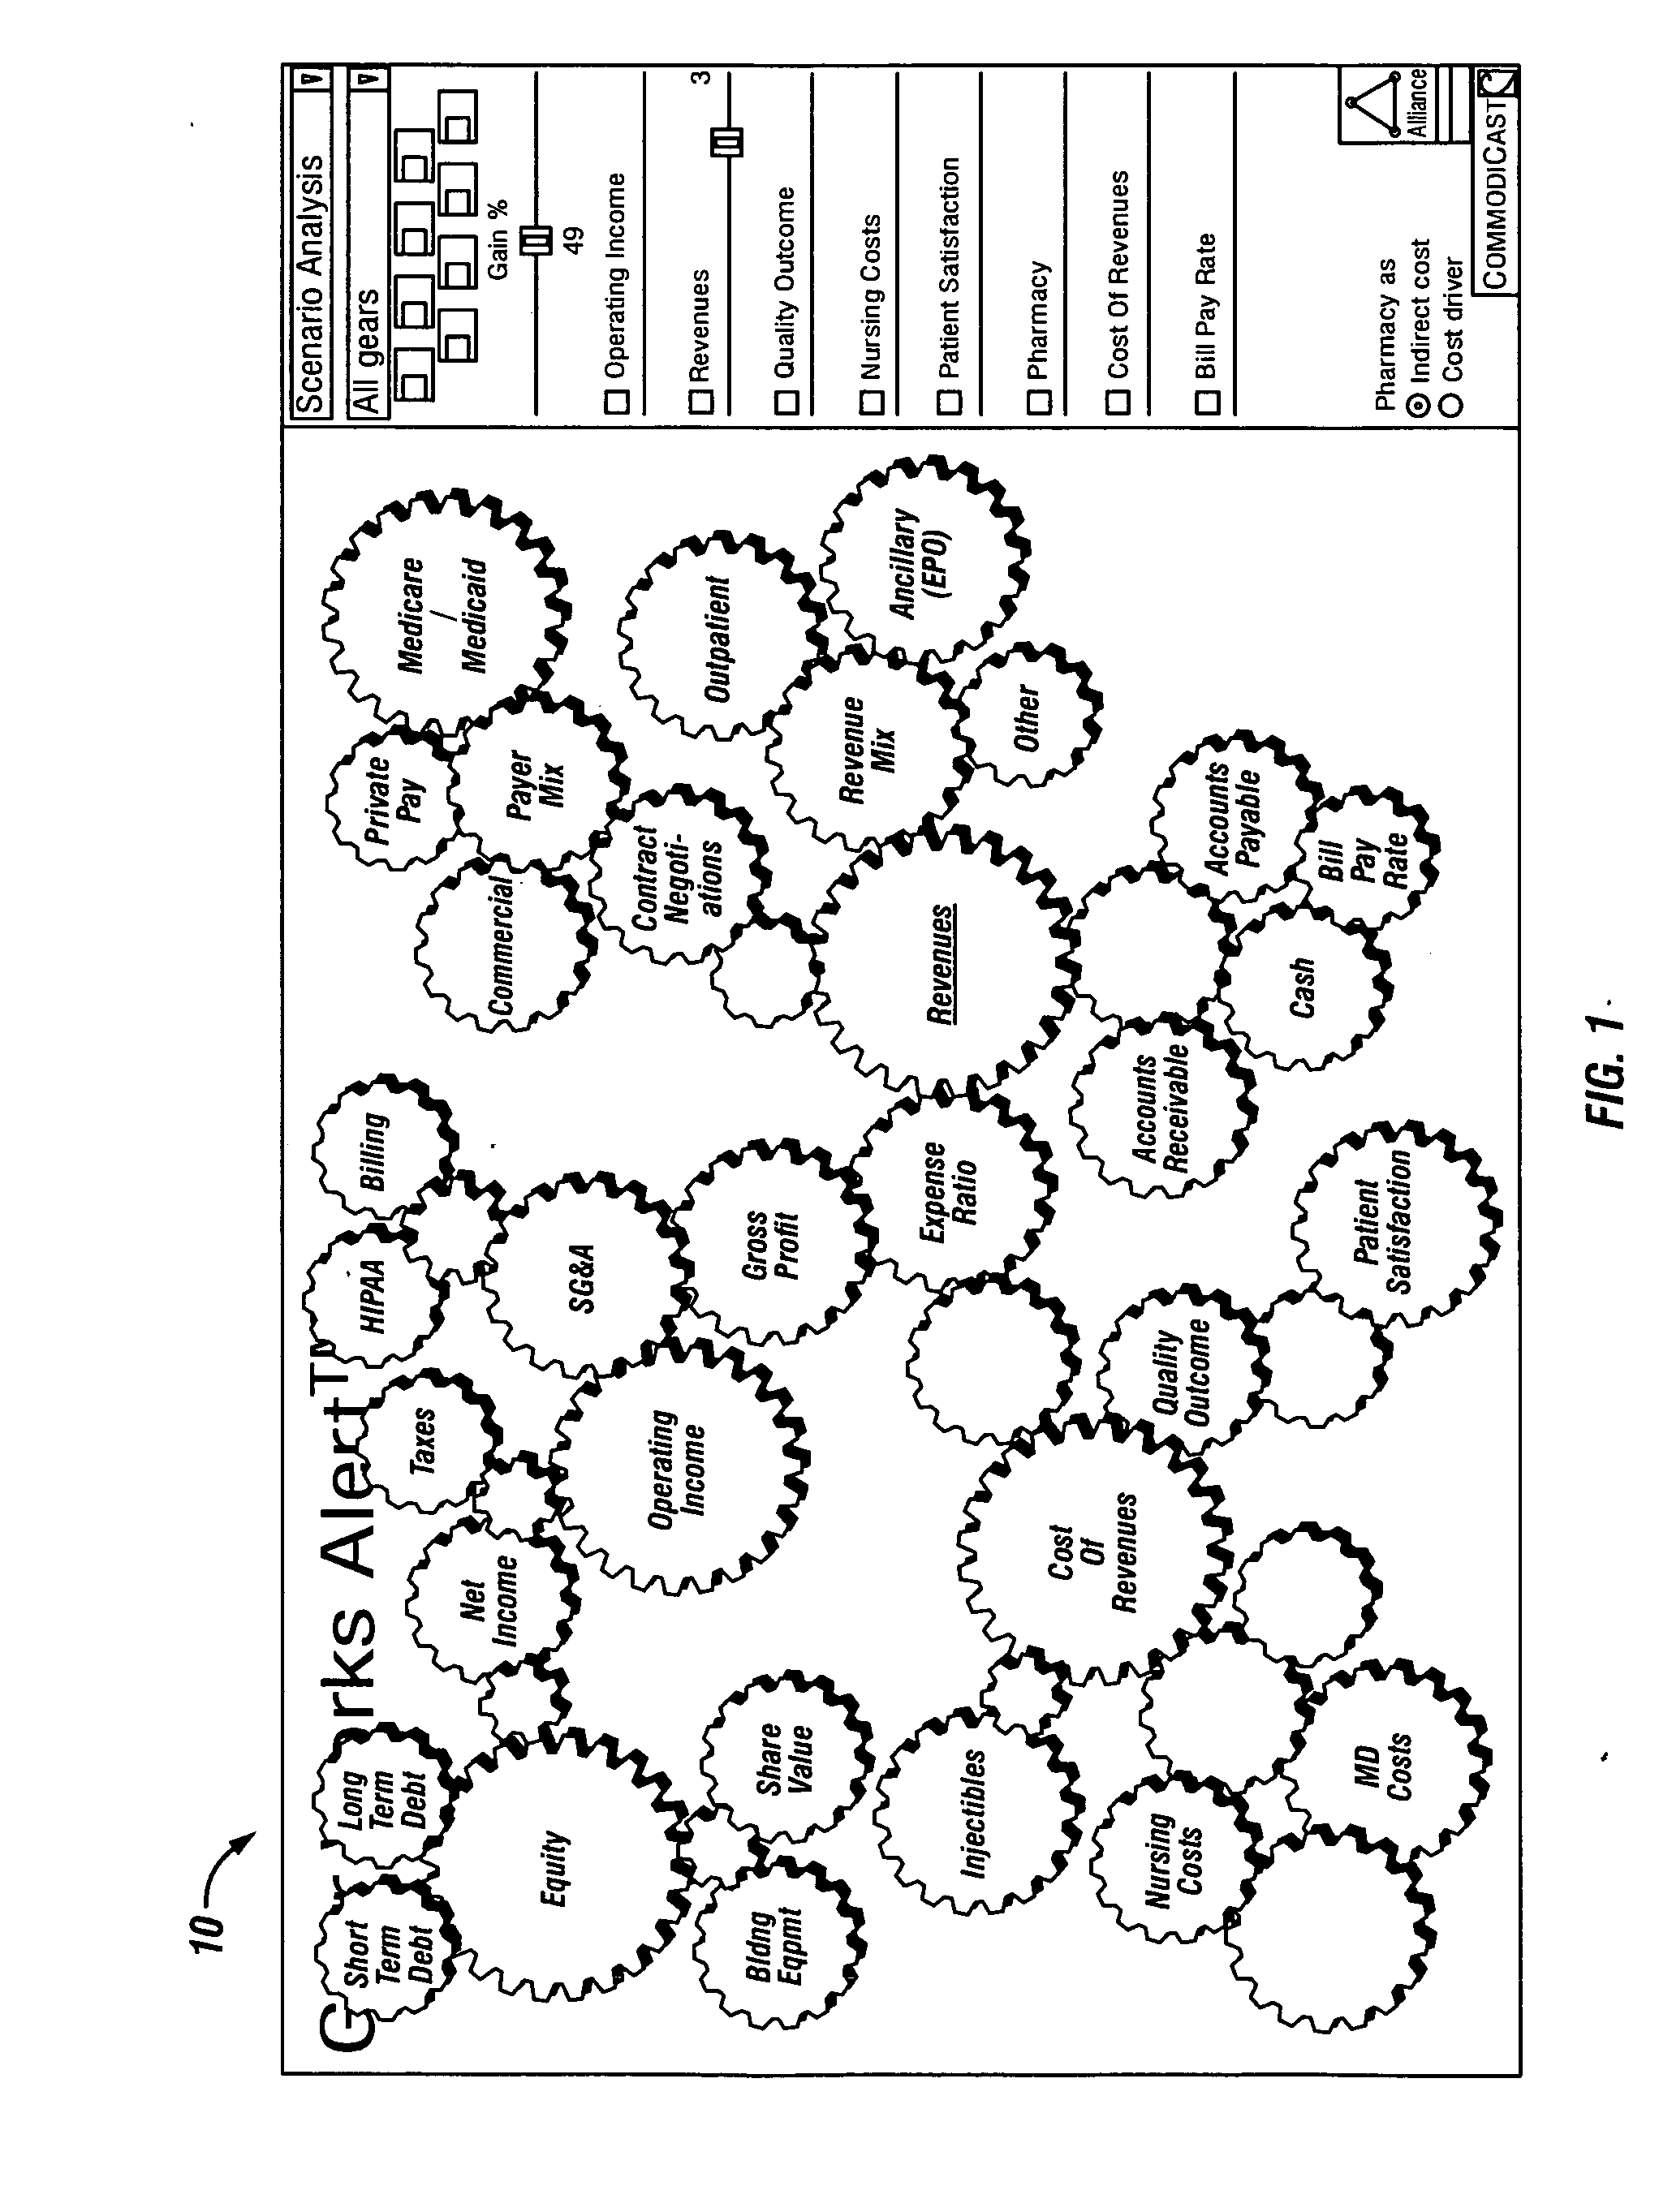 Method, apparatus and software for business and financial analysis